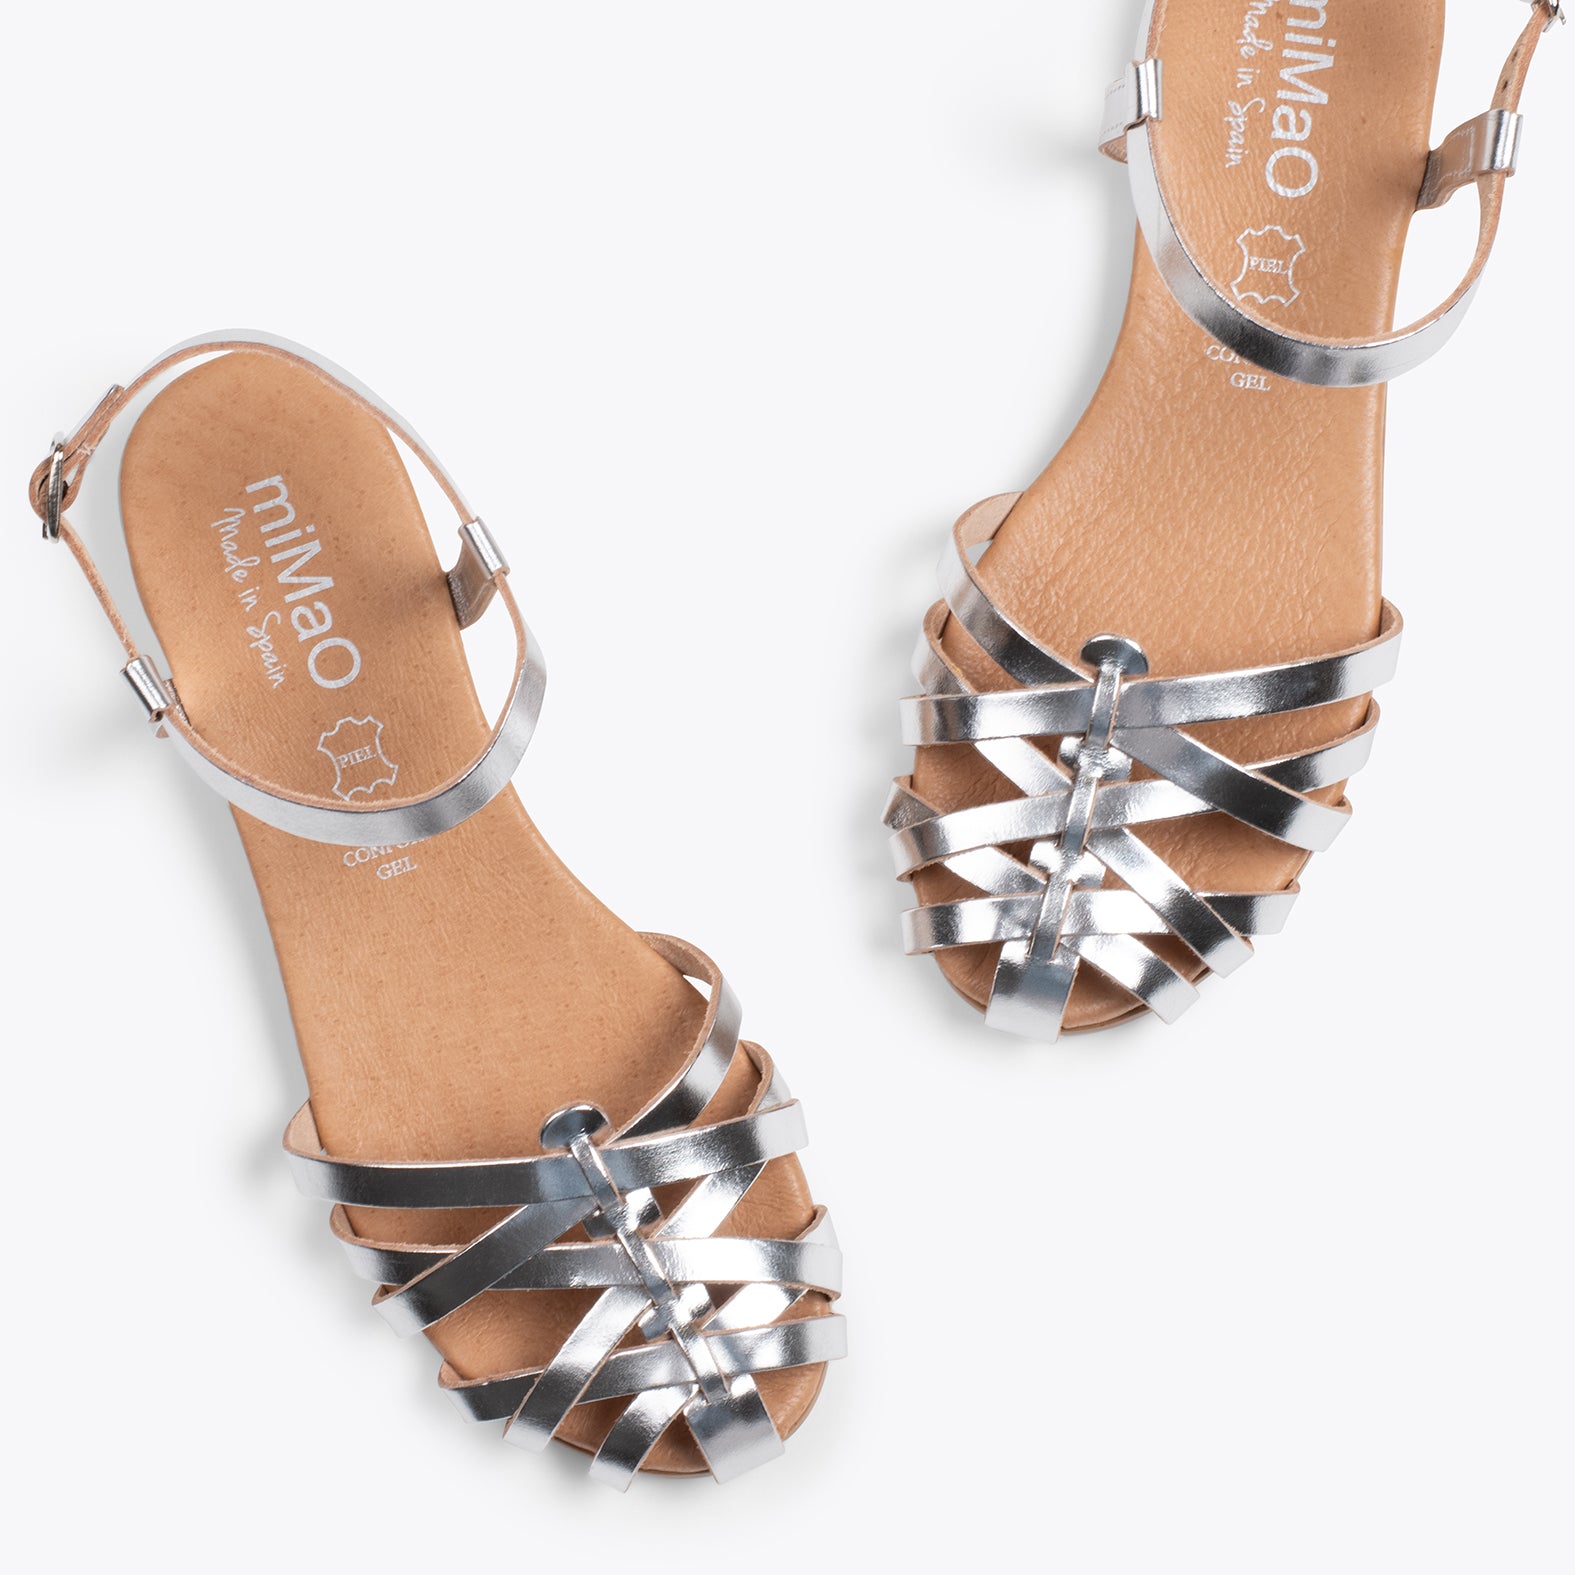 BEACH - SILVER sandal with straps